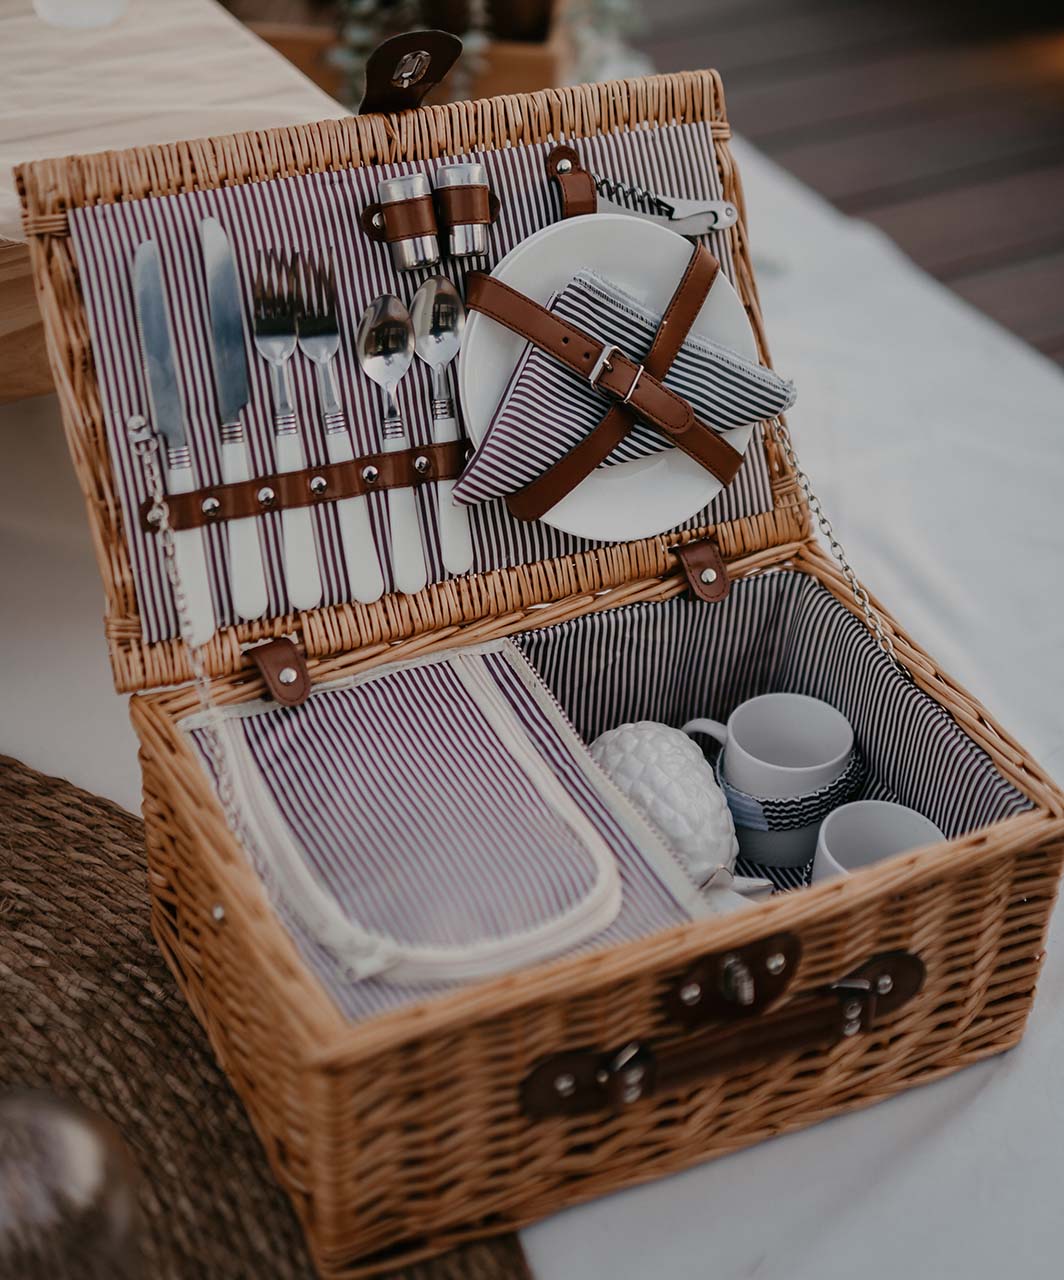 a picnic basket - slow travel gifts